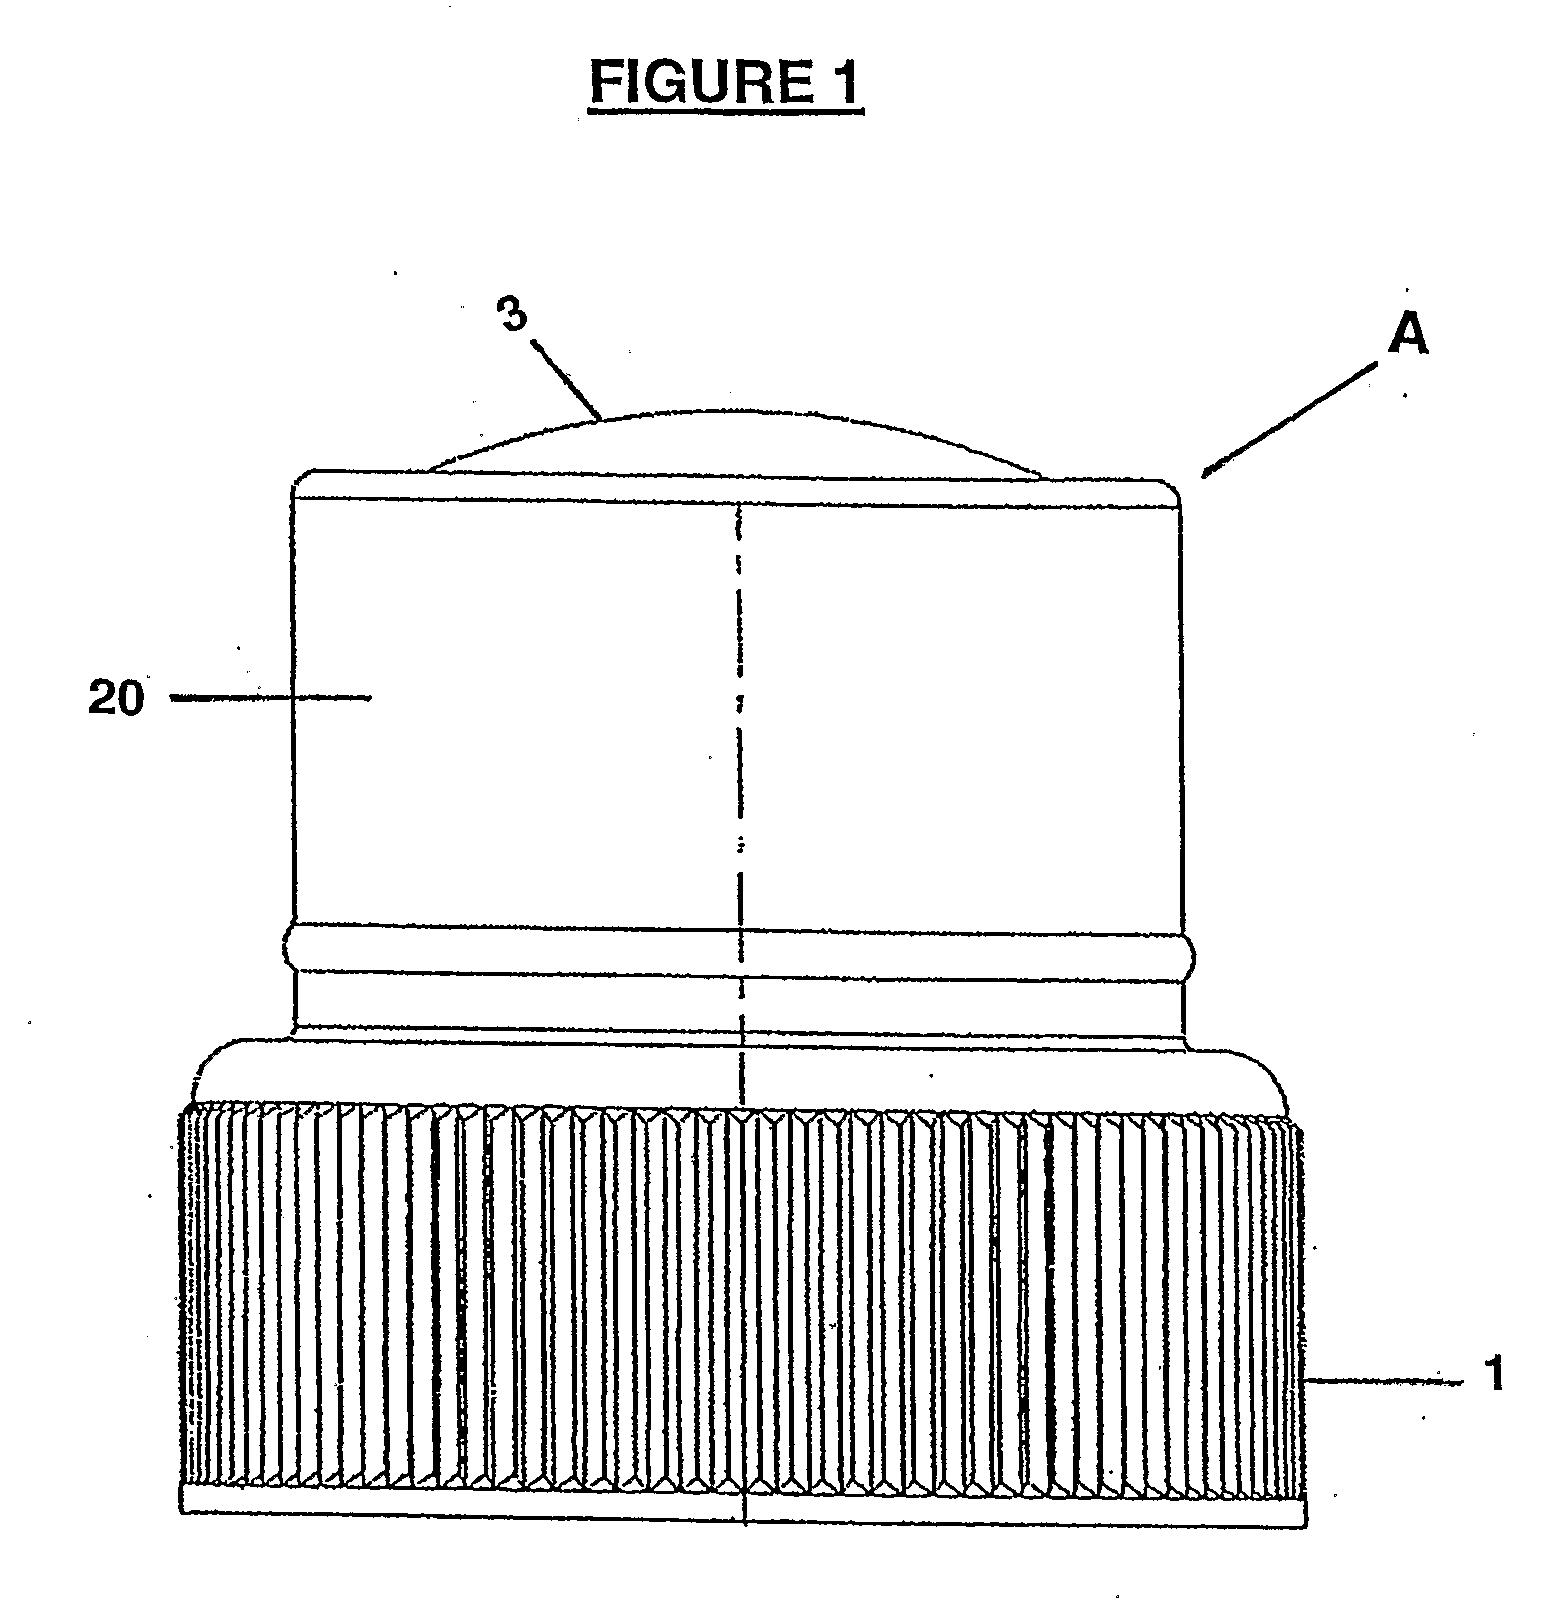 Dispensing Closure Having Membrane Opening Device With Cutting Teeth